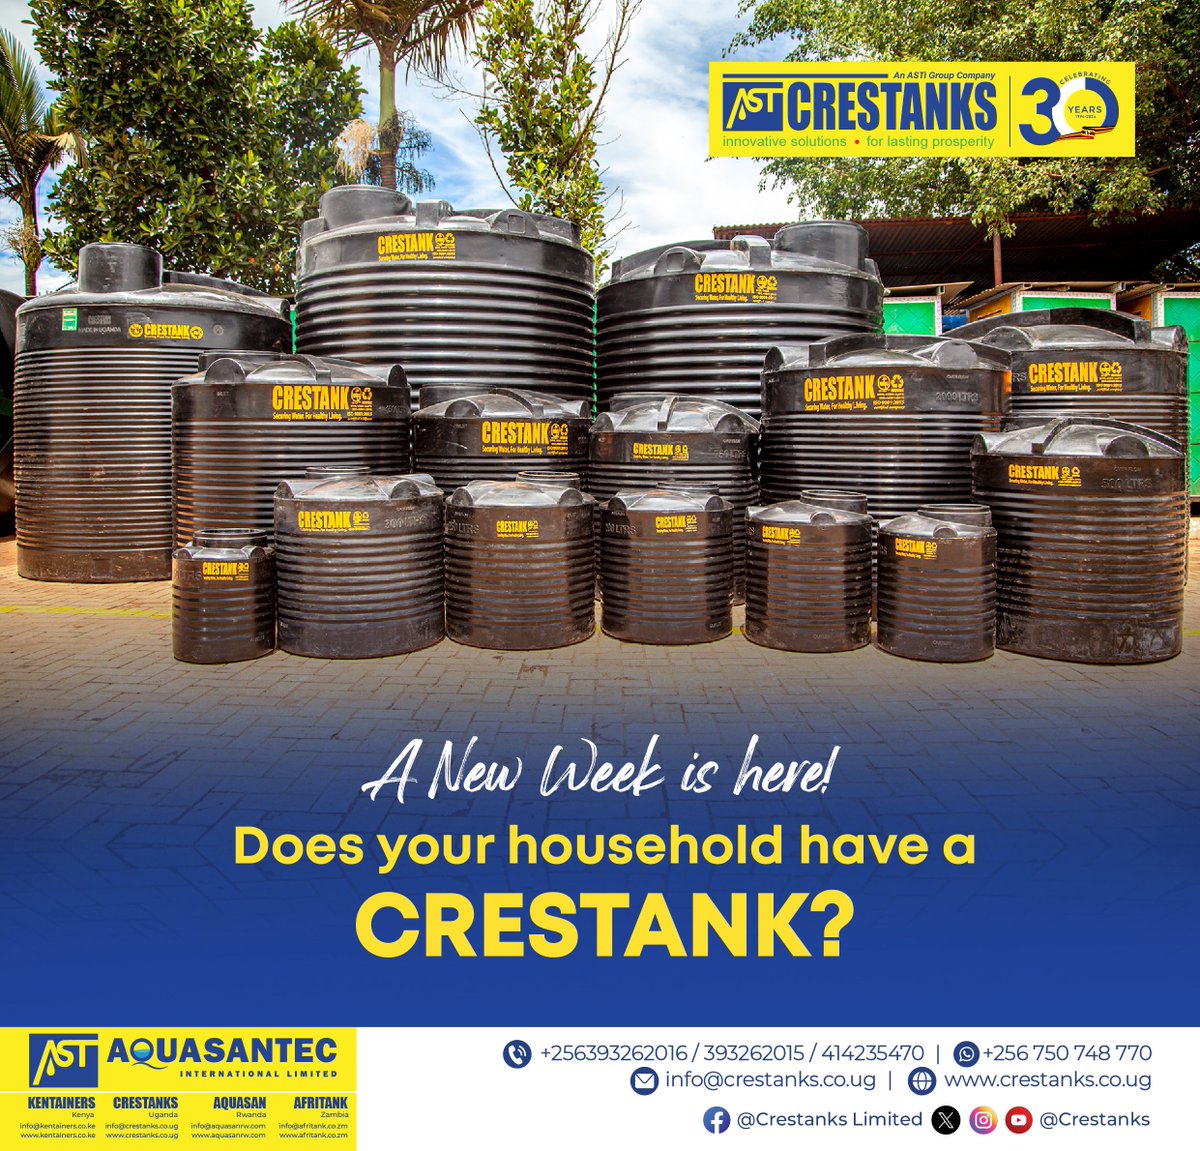 Tank up your home! Crestanks has tanks for every household.

Contact us on 0750748770 to place your orders.

#Crestanks #plasticproducts #watertanks #Newweek